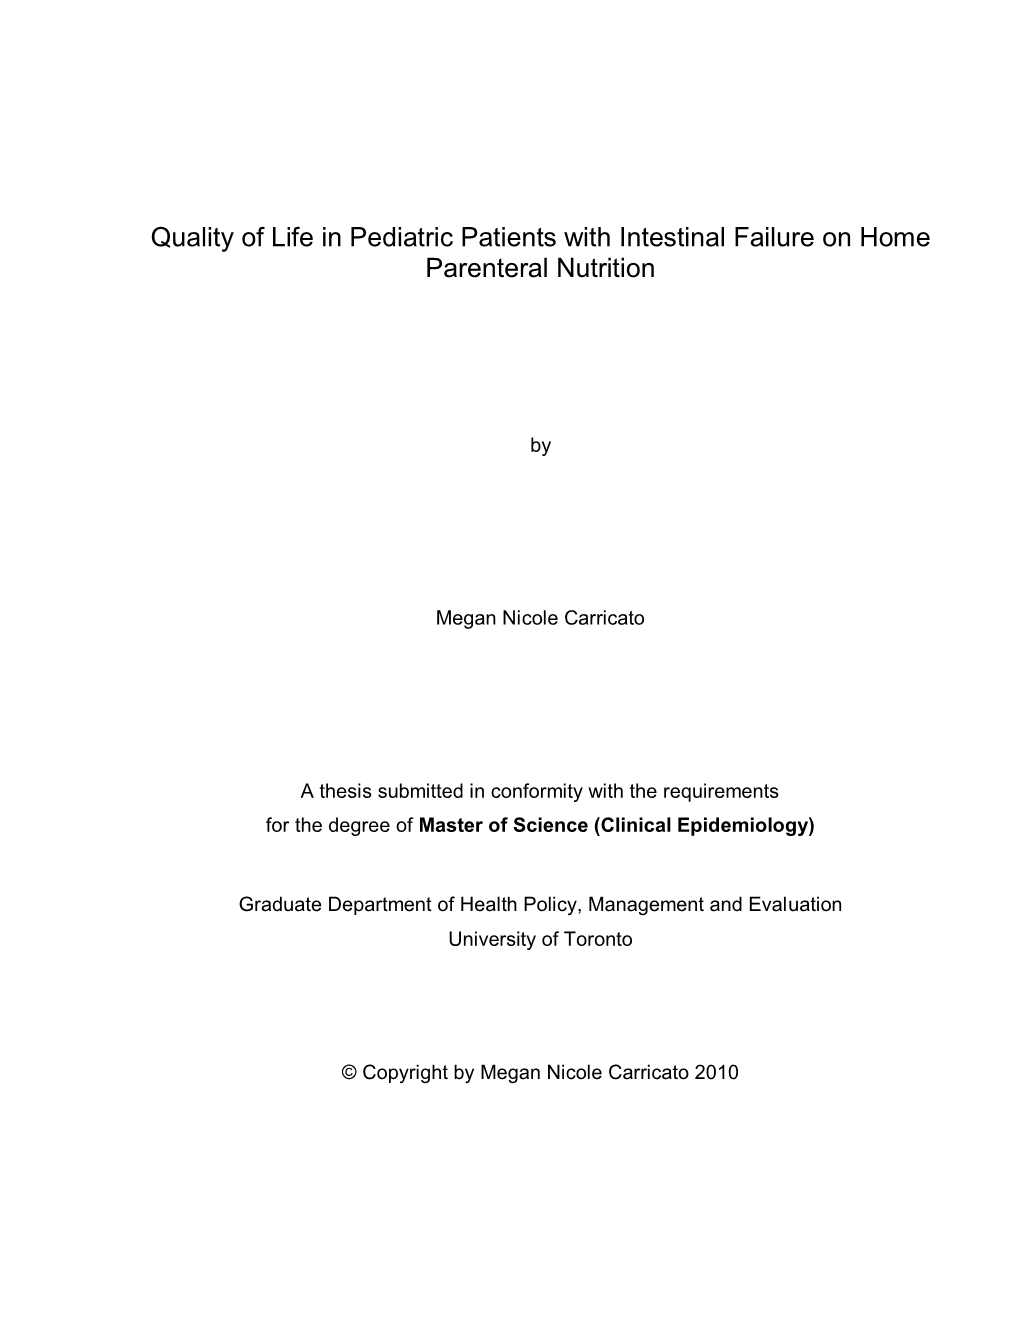 Quality of Life in Pediatric Patients with Intestinal Failure on Home Parenteral Nutrition